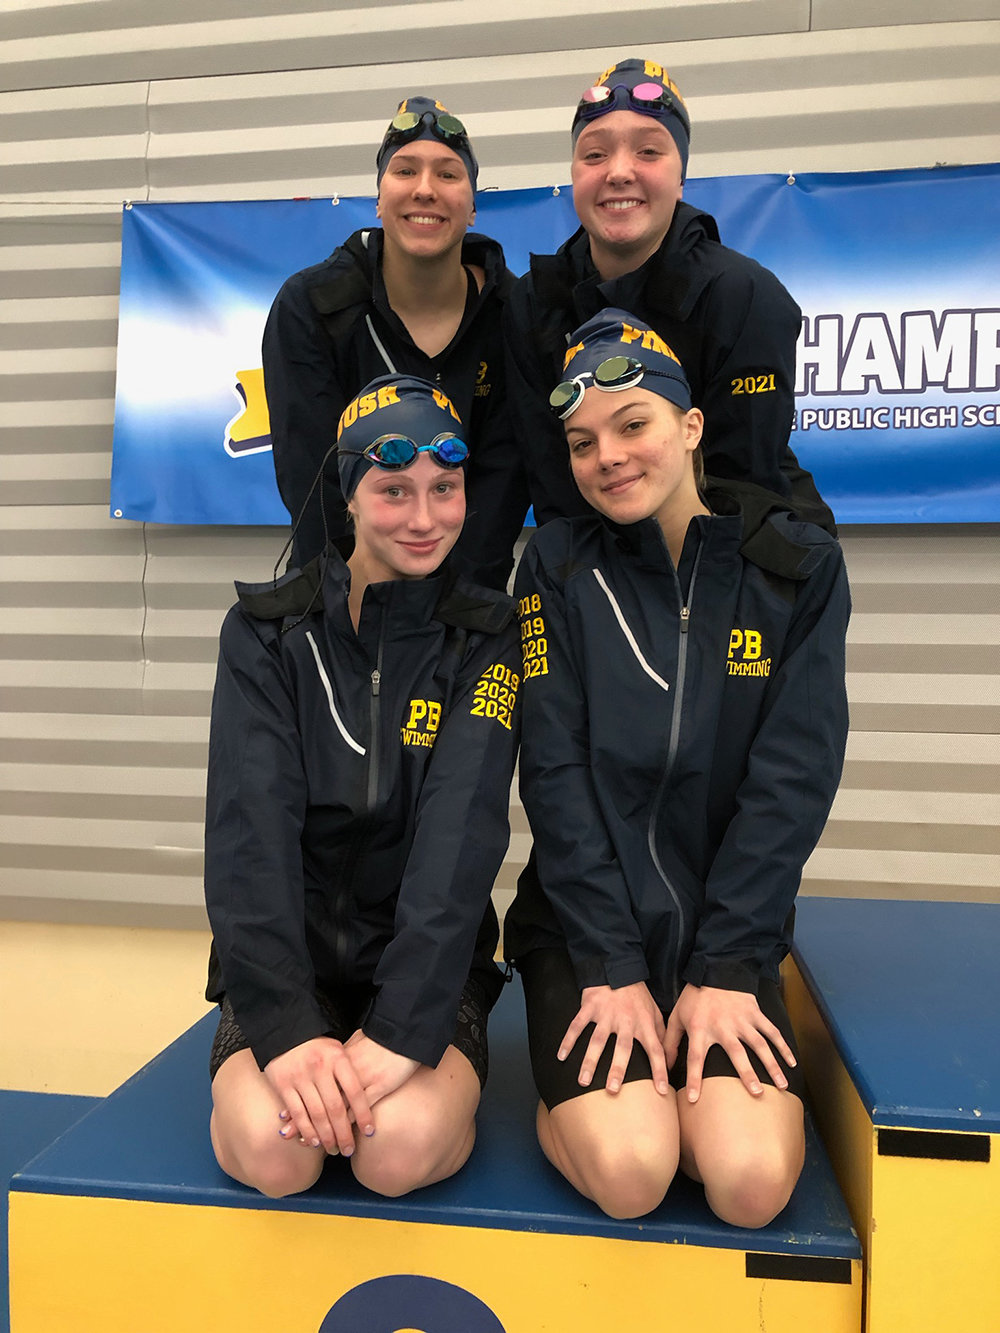 Pine Bush’s 400-meter relay team of clockwise from top: Elishka Hajek, Katie Webster, Mackenzie Gula and Madaghan O’Shea finished second in the NYSPHSAA and third in the state Federation at the New York State girls’ swimming championships at Ithaca College.